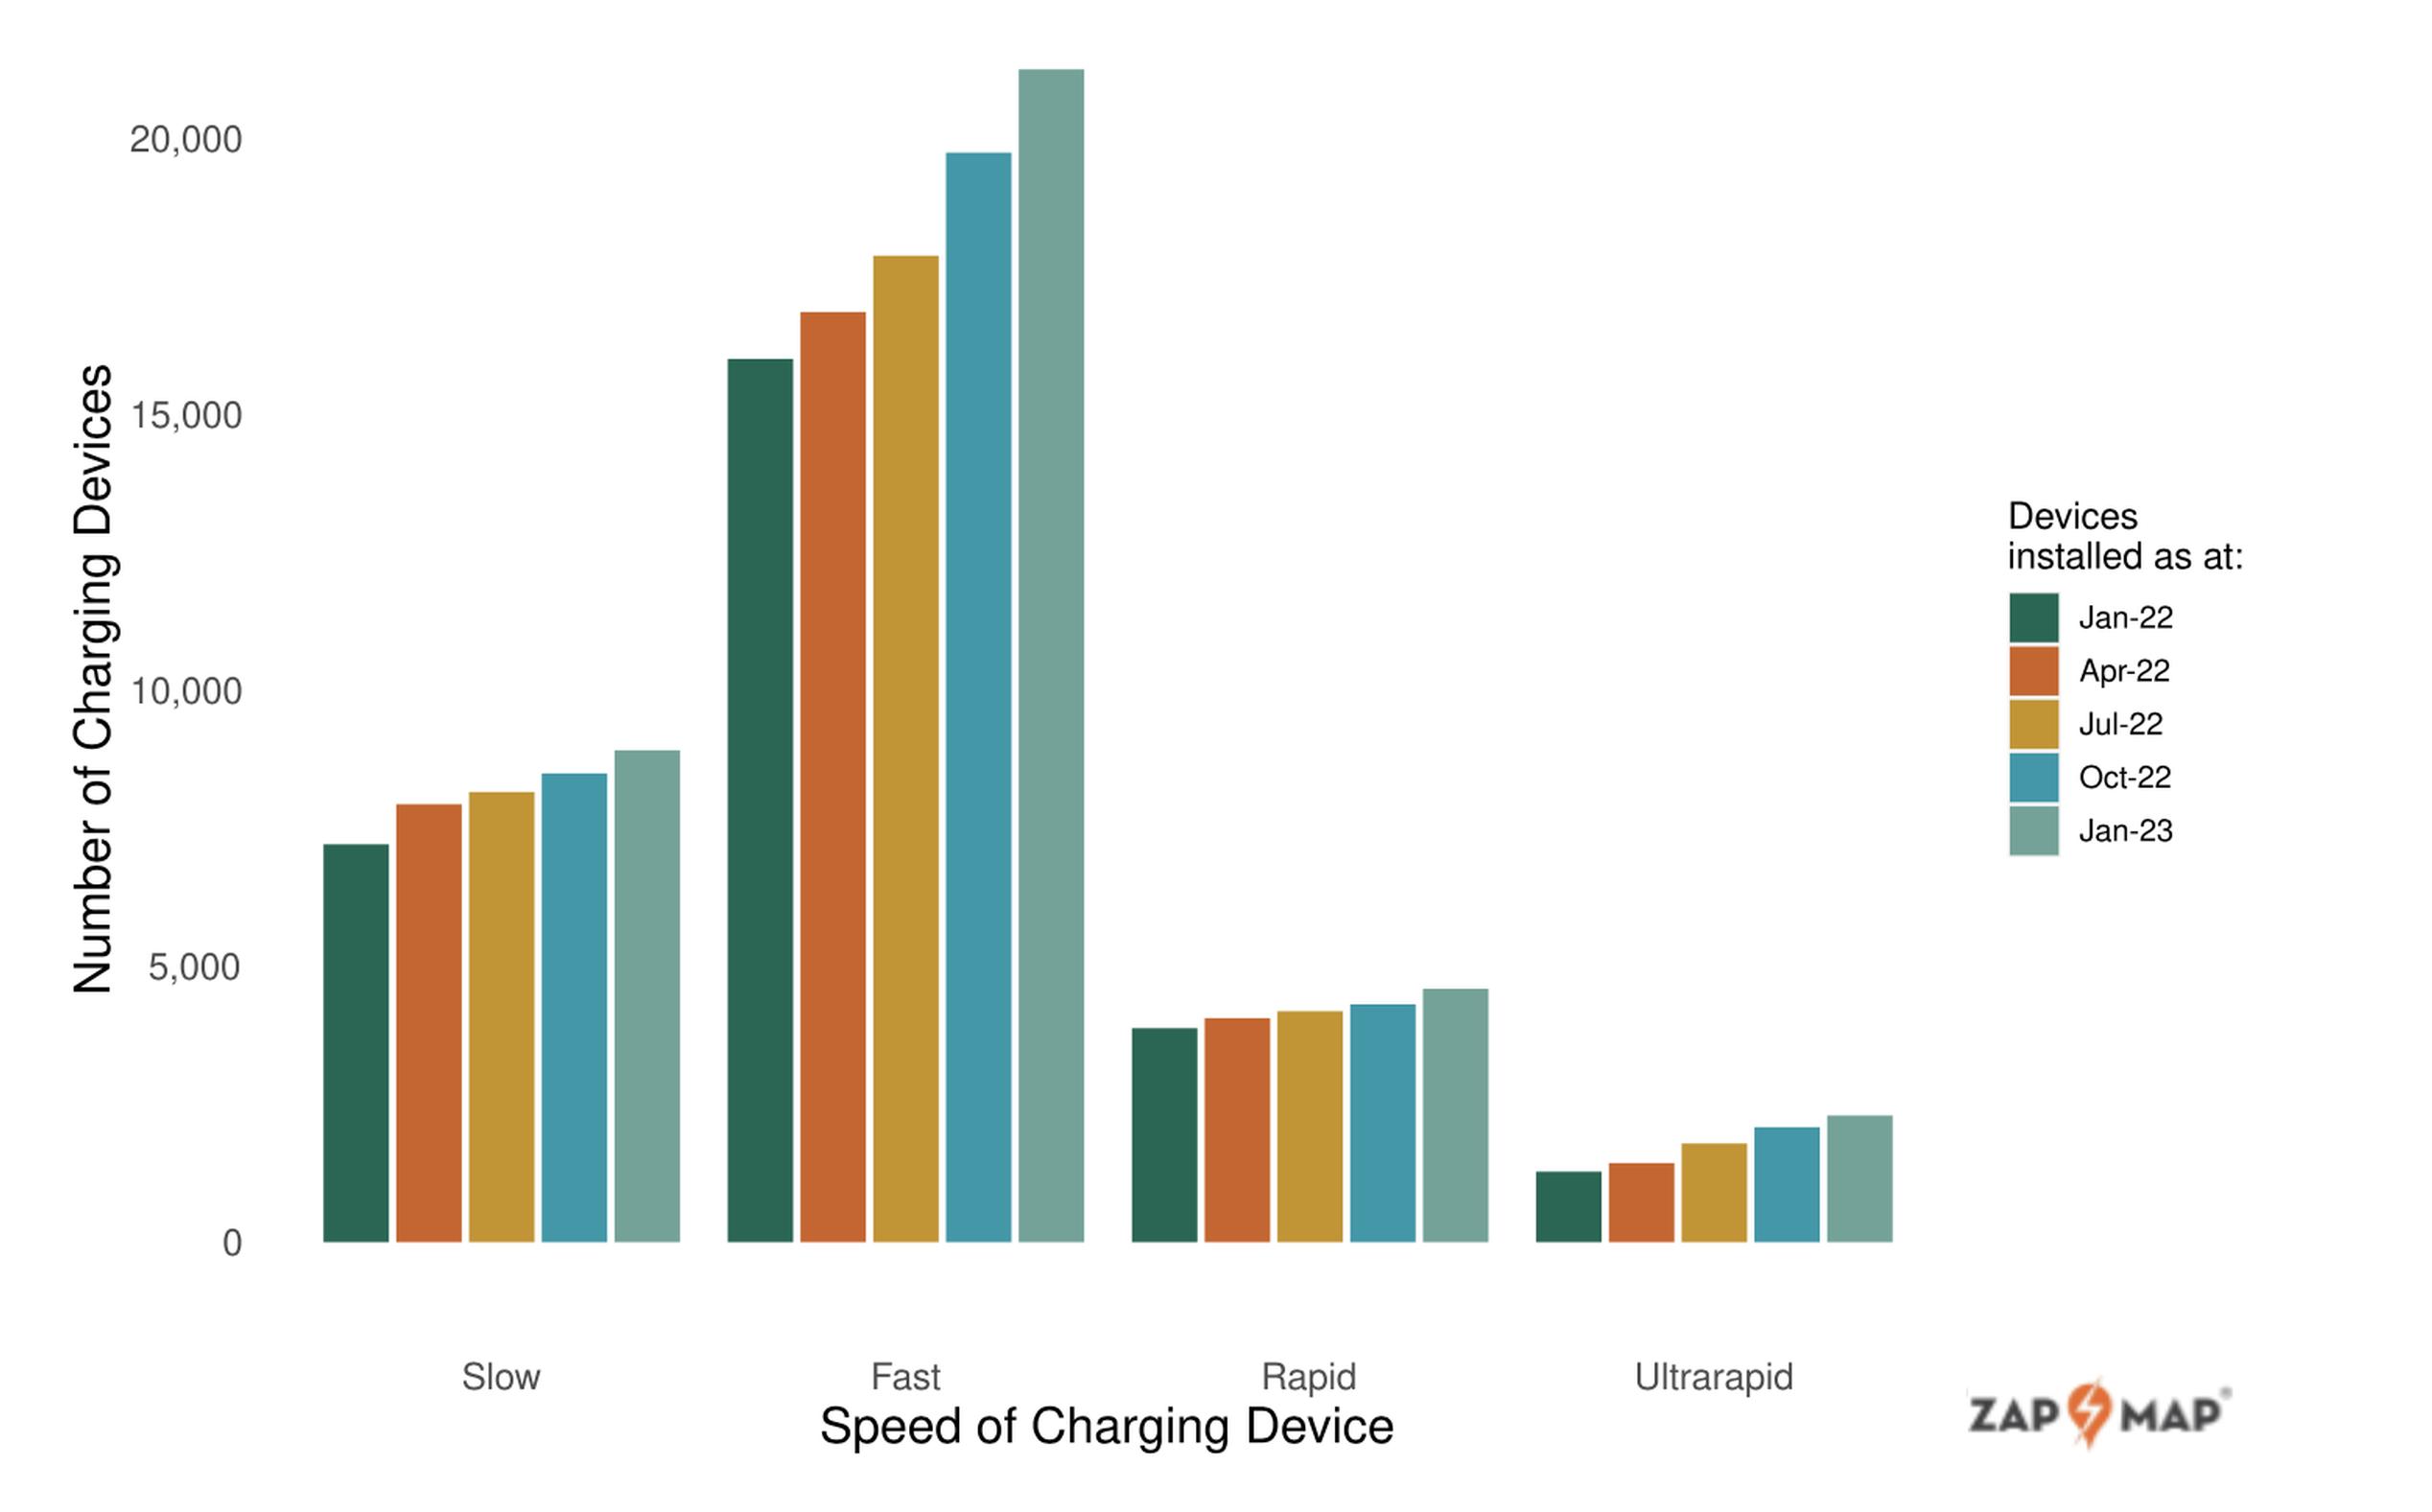 UK starts 2023 with 37,055 public charging devices